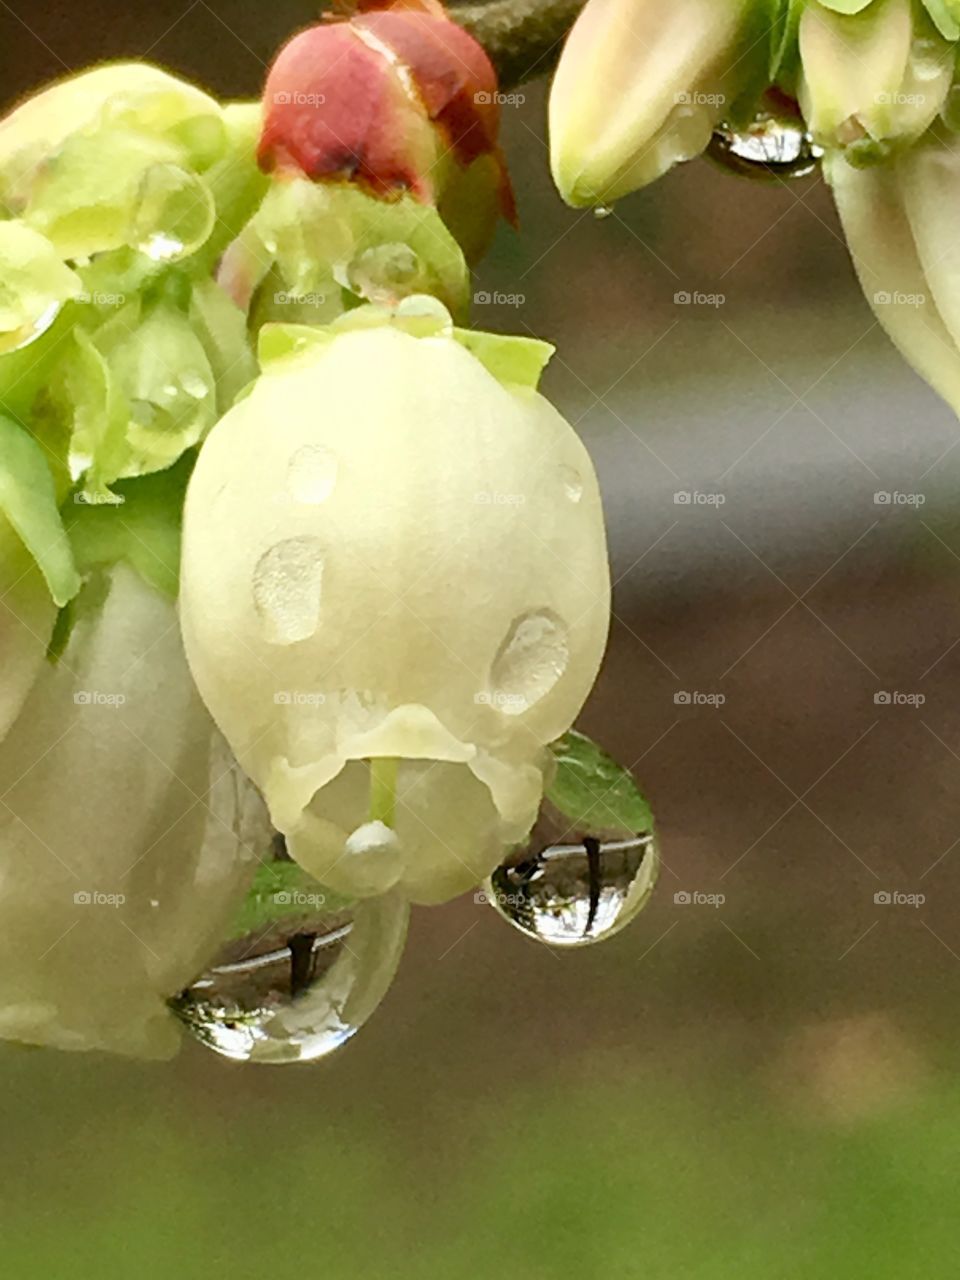 Blueberry bell rings with raindrops; reflections of the morning